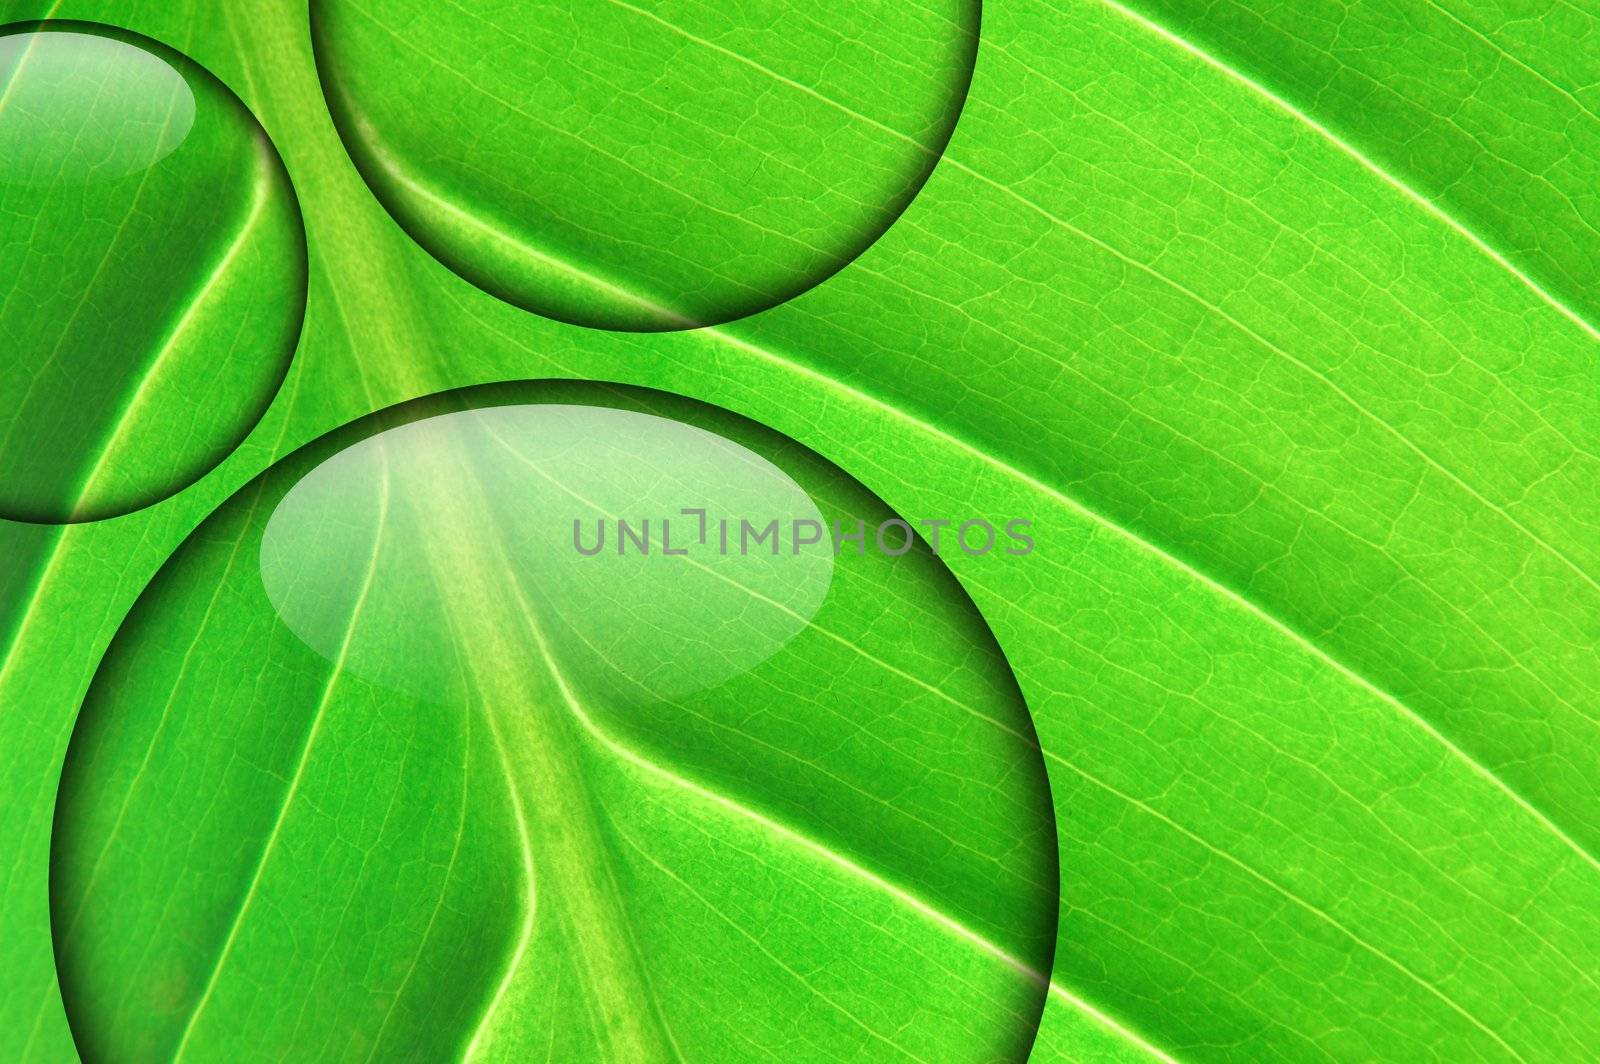 spa concept with water drop or droplet on green leaf texture